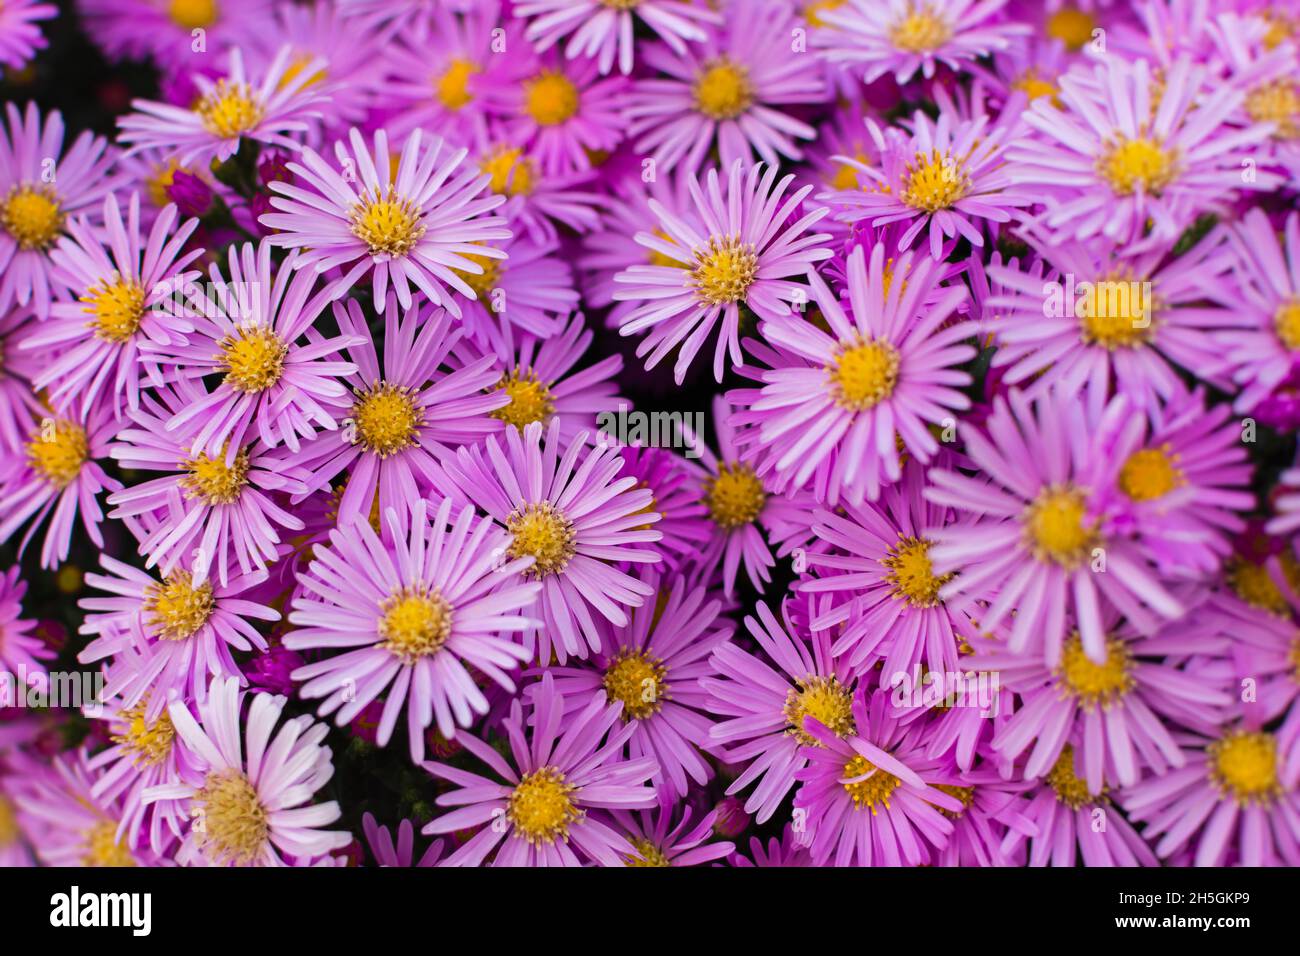 Symphyotrichum pink close-up. Beautiful bright purple autumn flowers bloomed in the garden. Natural floral macro background. Textured full frame. The Stock Photo